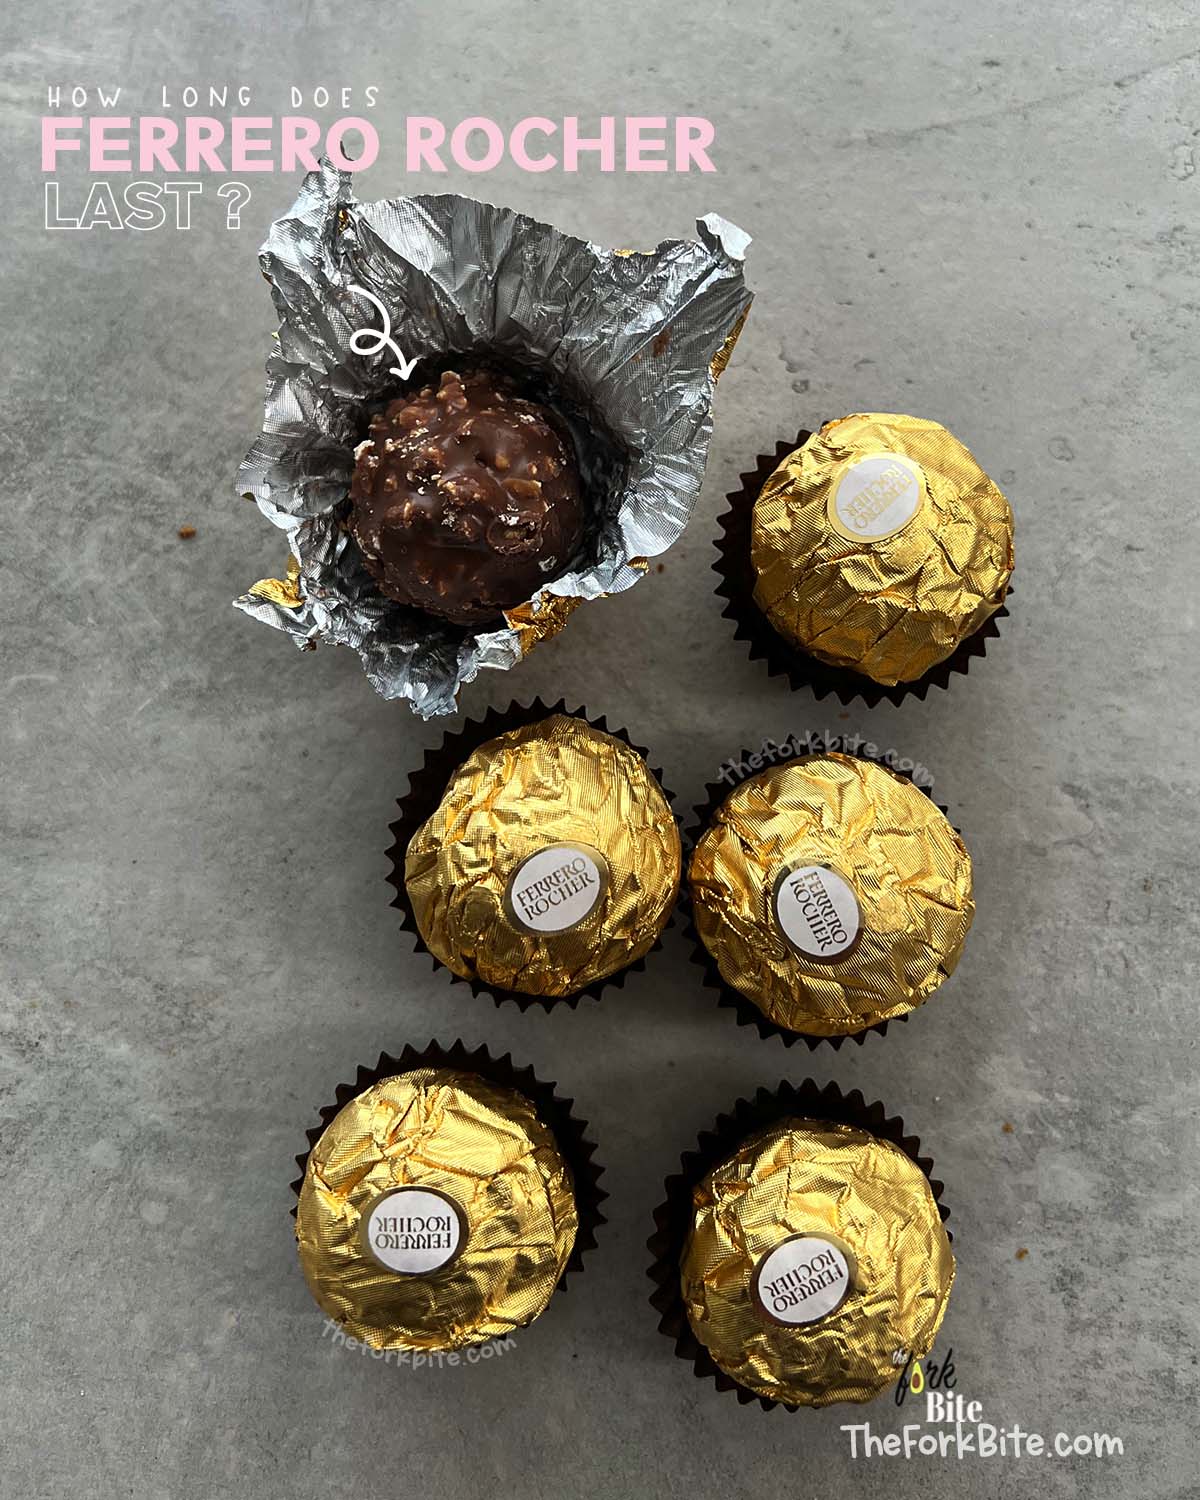 If you want to enjoy the Ferrero Rocher at their best, it is best to consume them within six months of opening the package.